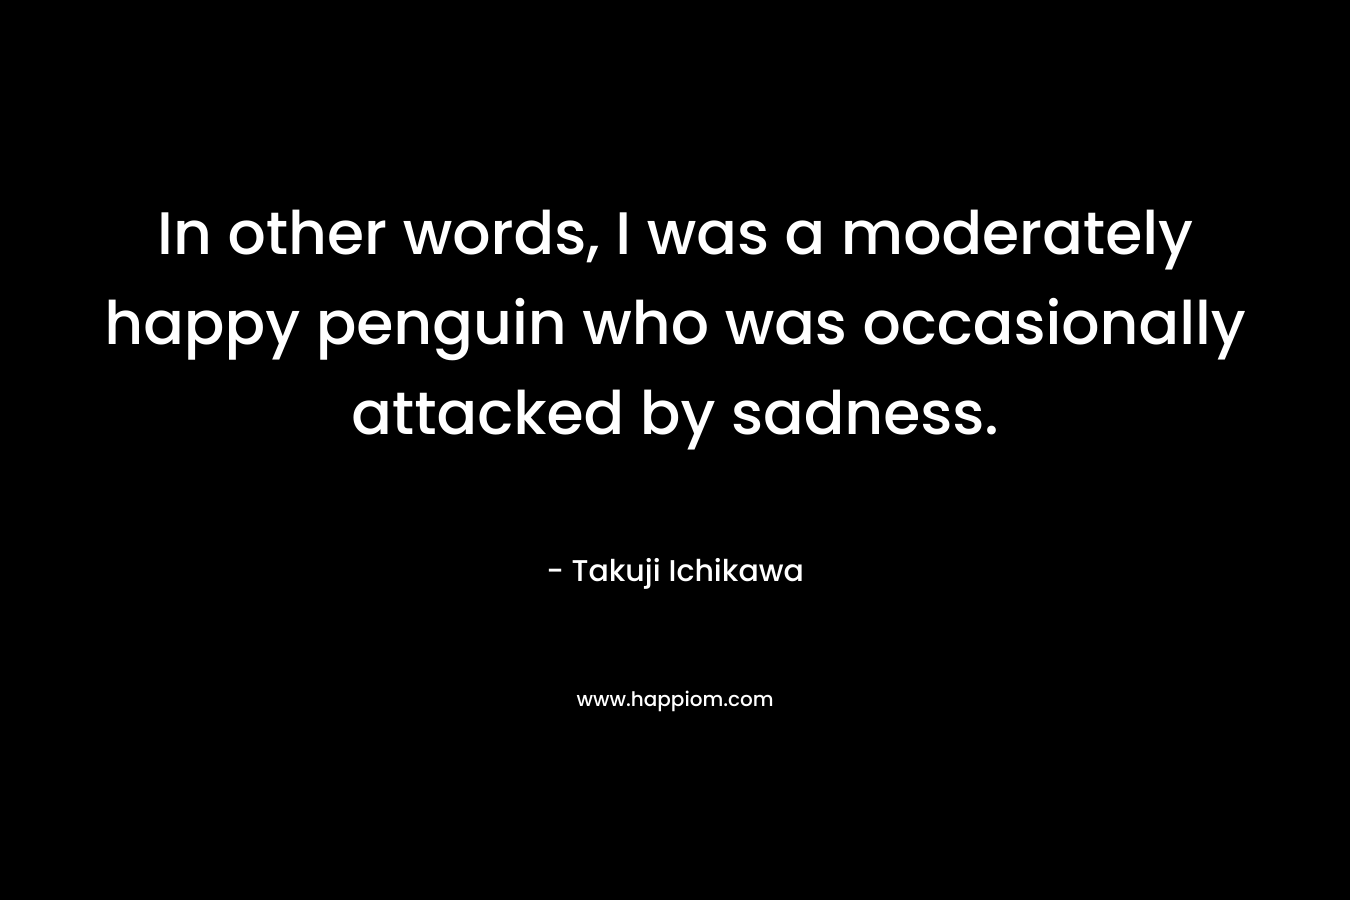 In other words, I was a moderately happy penguin who was occasionally attacked by sadness. – Takuji Ichikawa